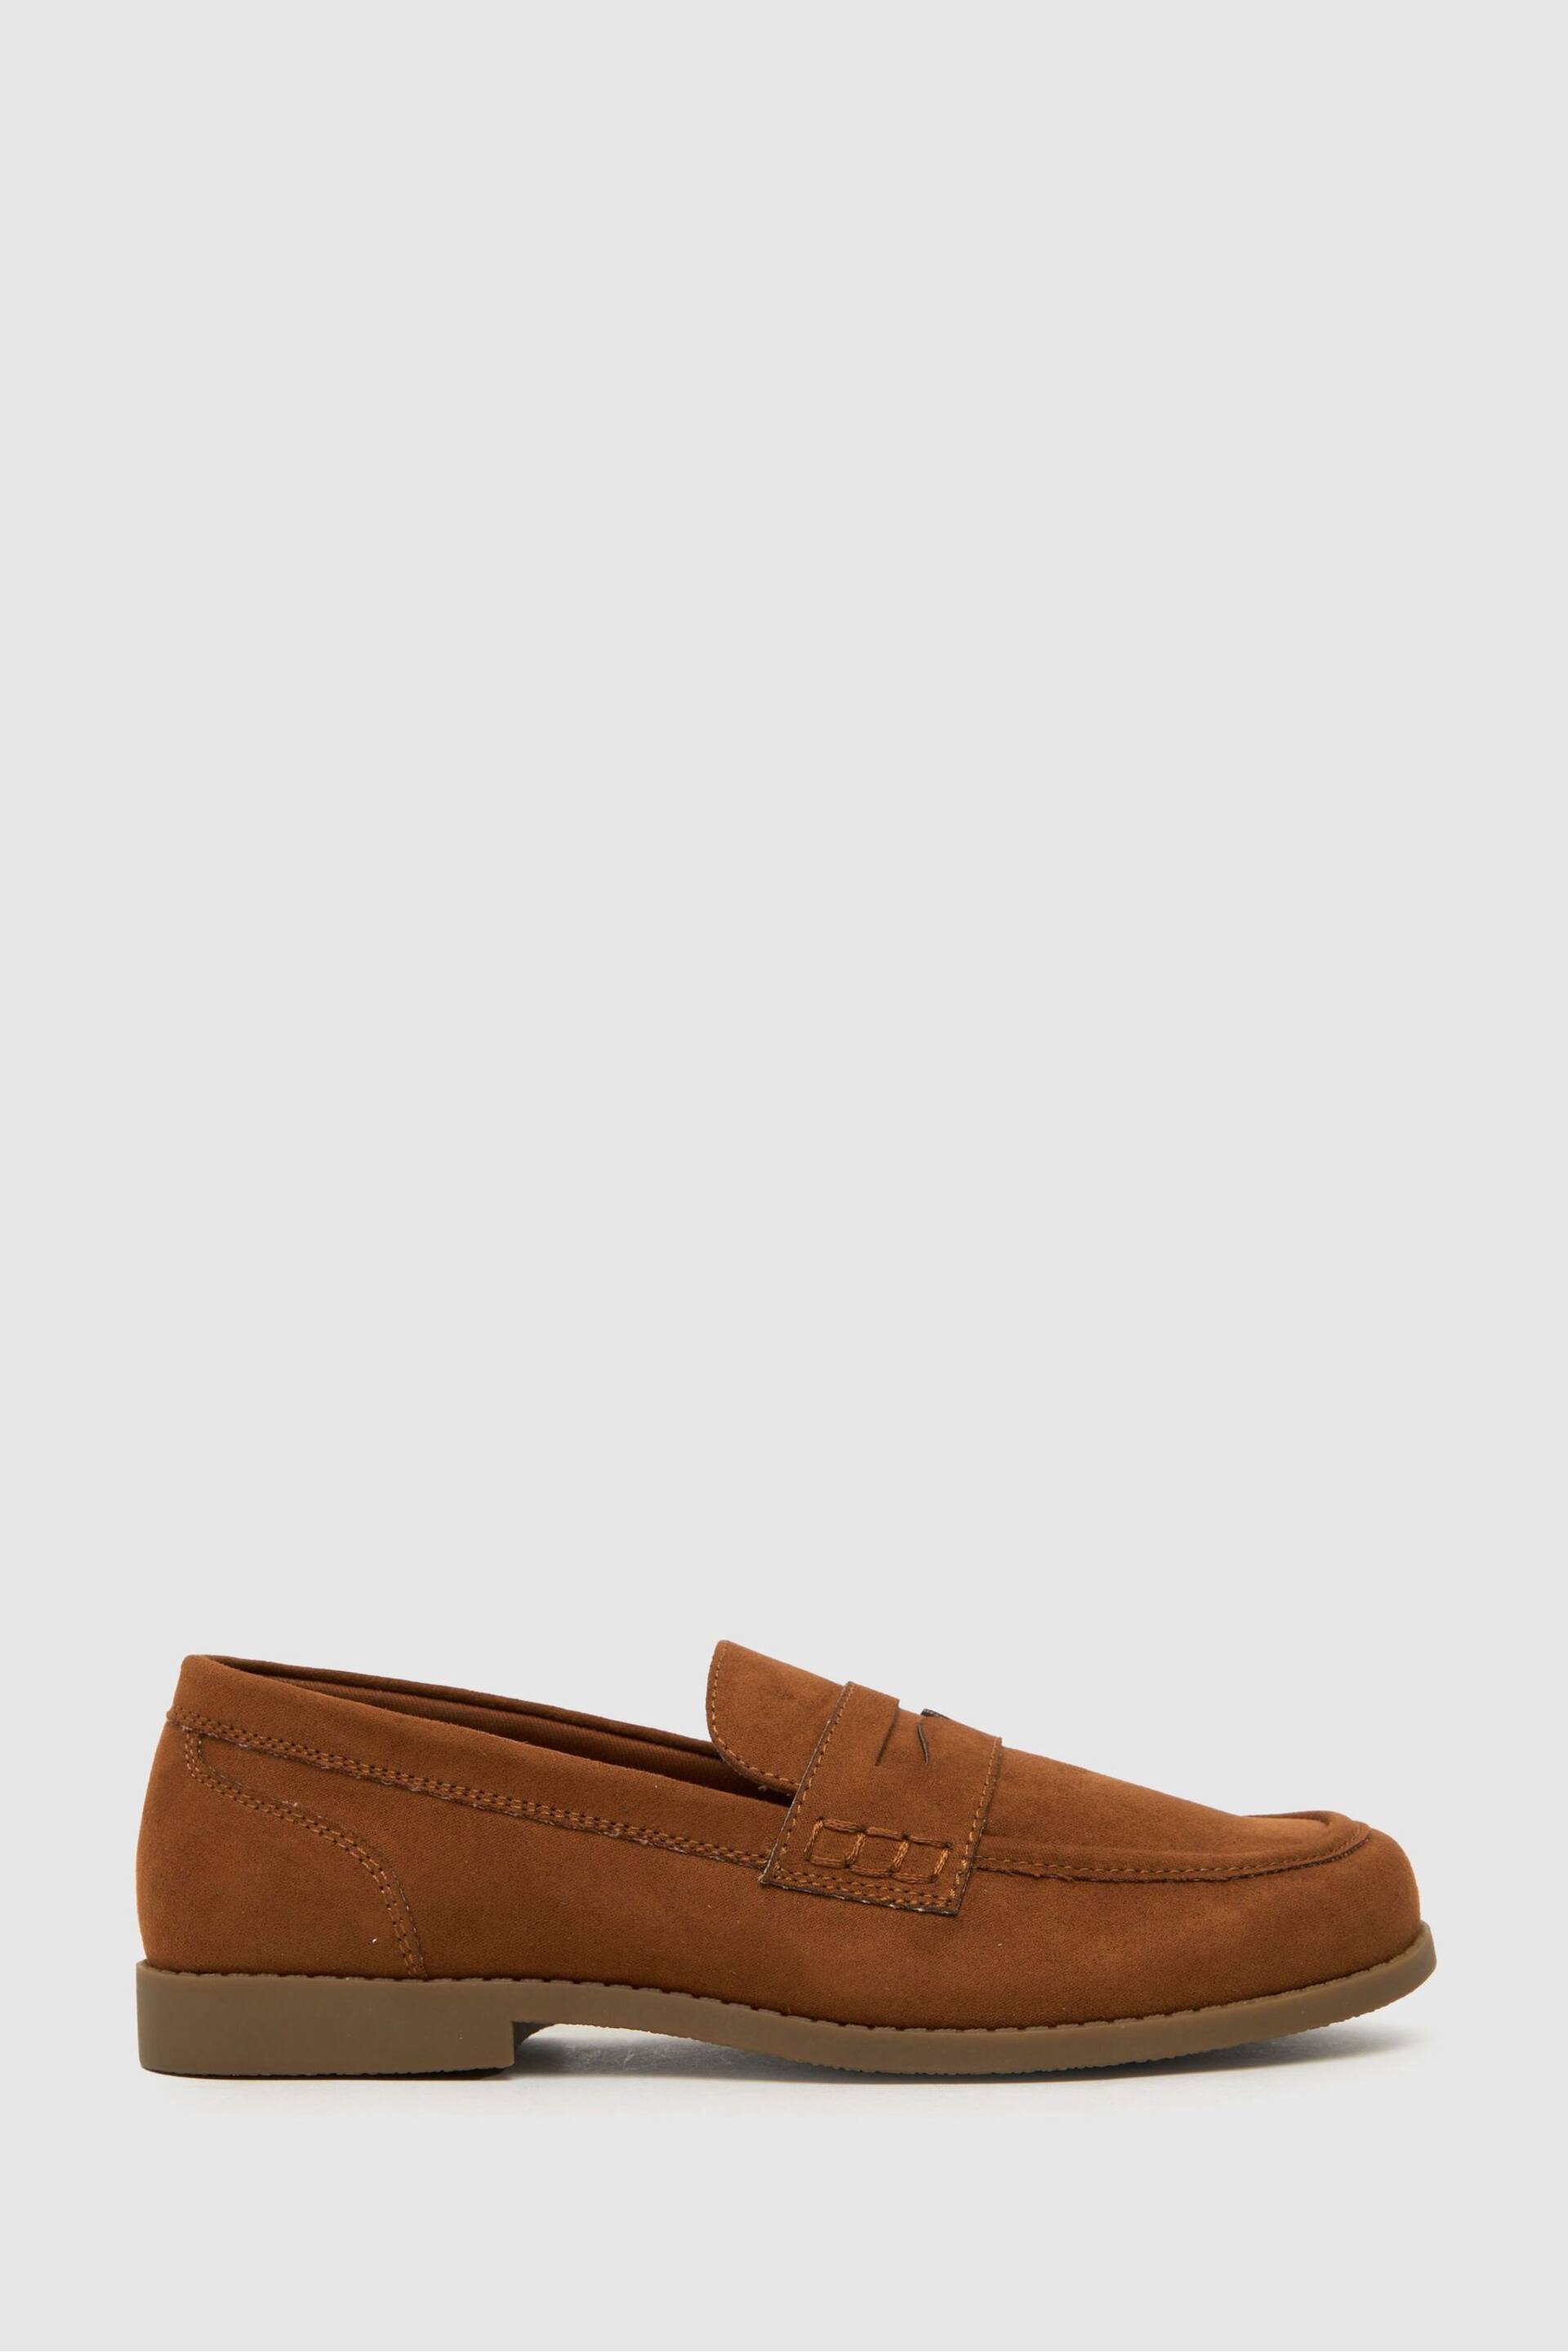 Schuh Lightning Brown Loafers - Image 1 of 1